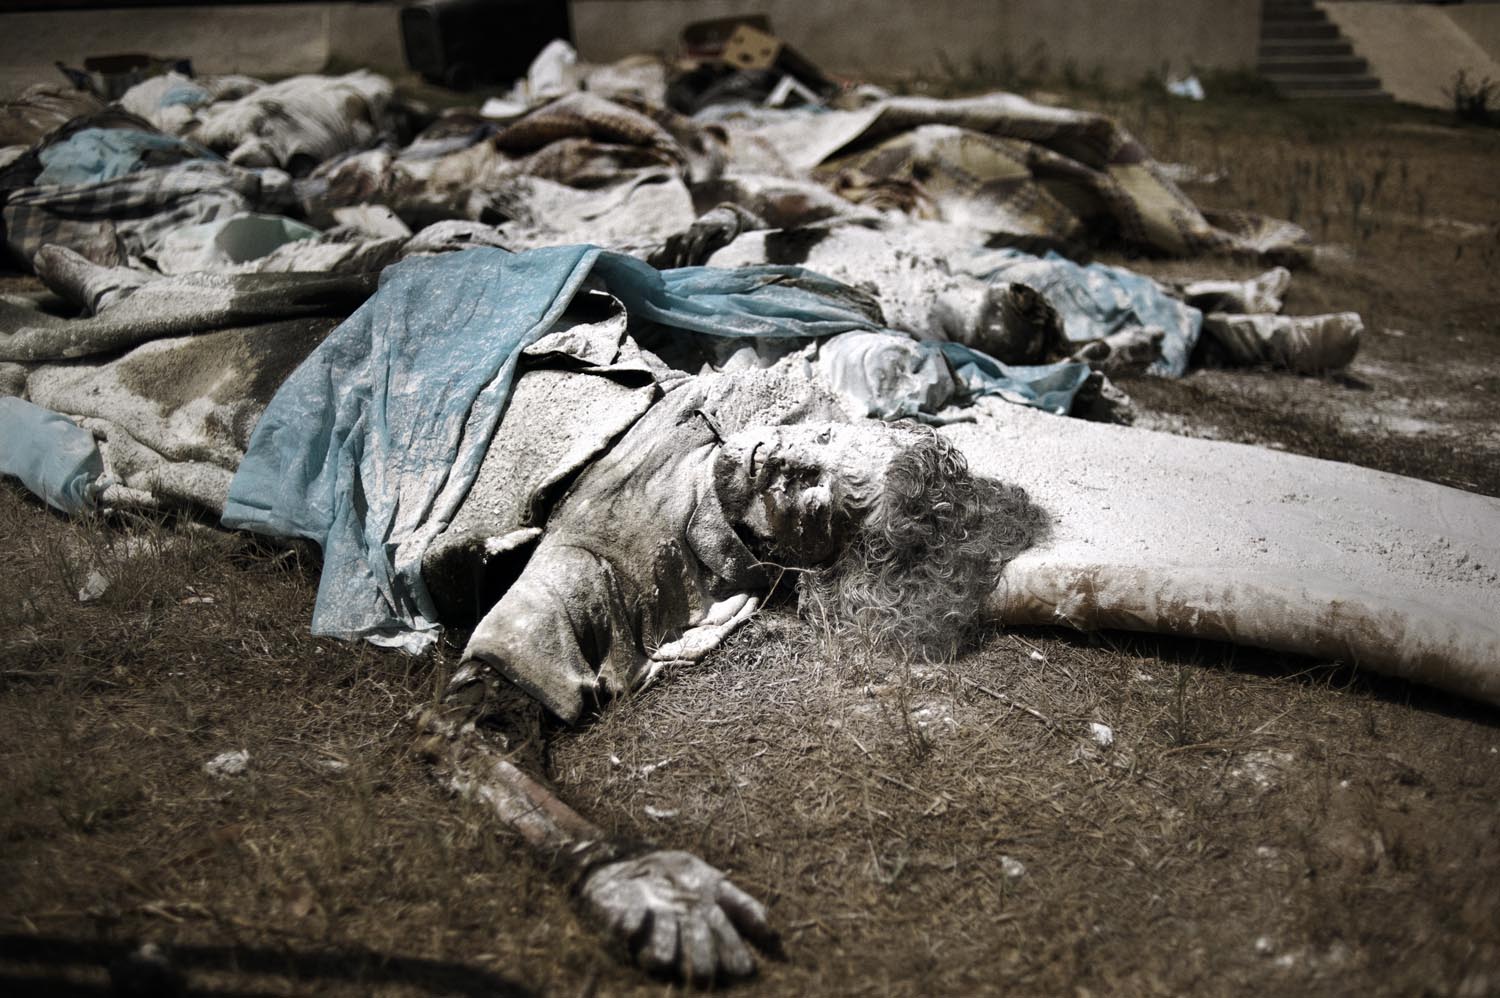 Dead bodies, some that appeared to be victims of executions, lie dumped in a yard at the abandoned Abu Slim hospital, August 27, 2011.